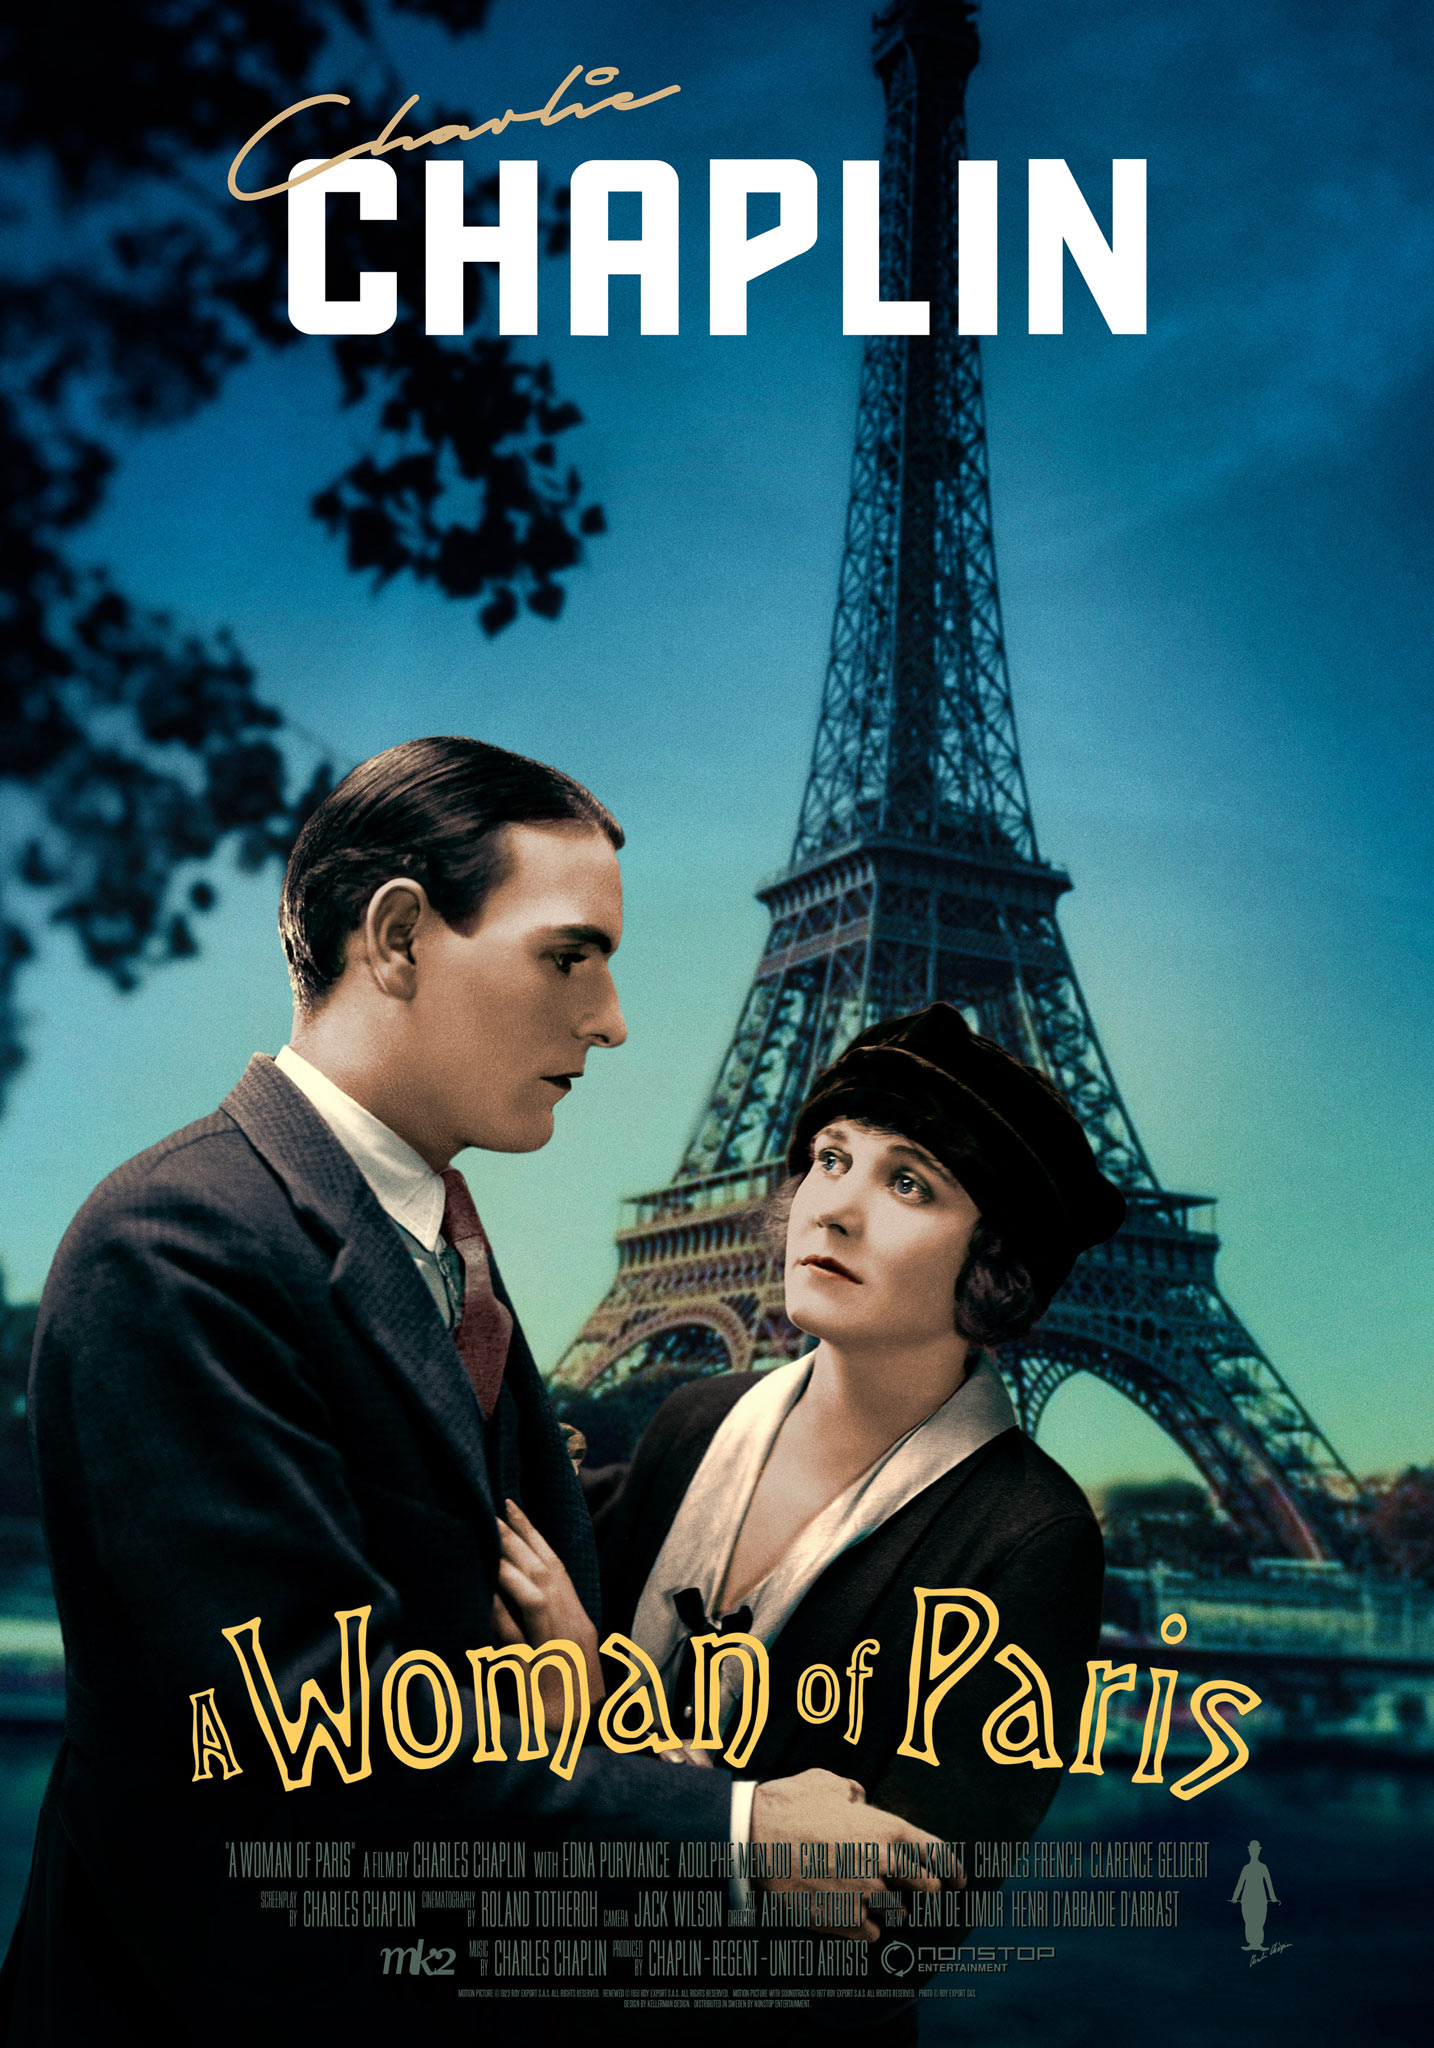 A Woman of Paris (1923) theatrical onesheet